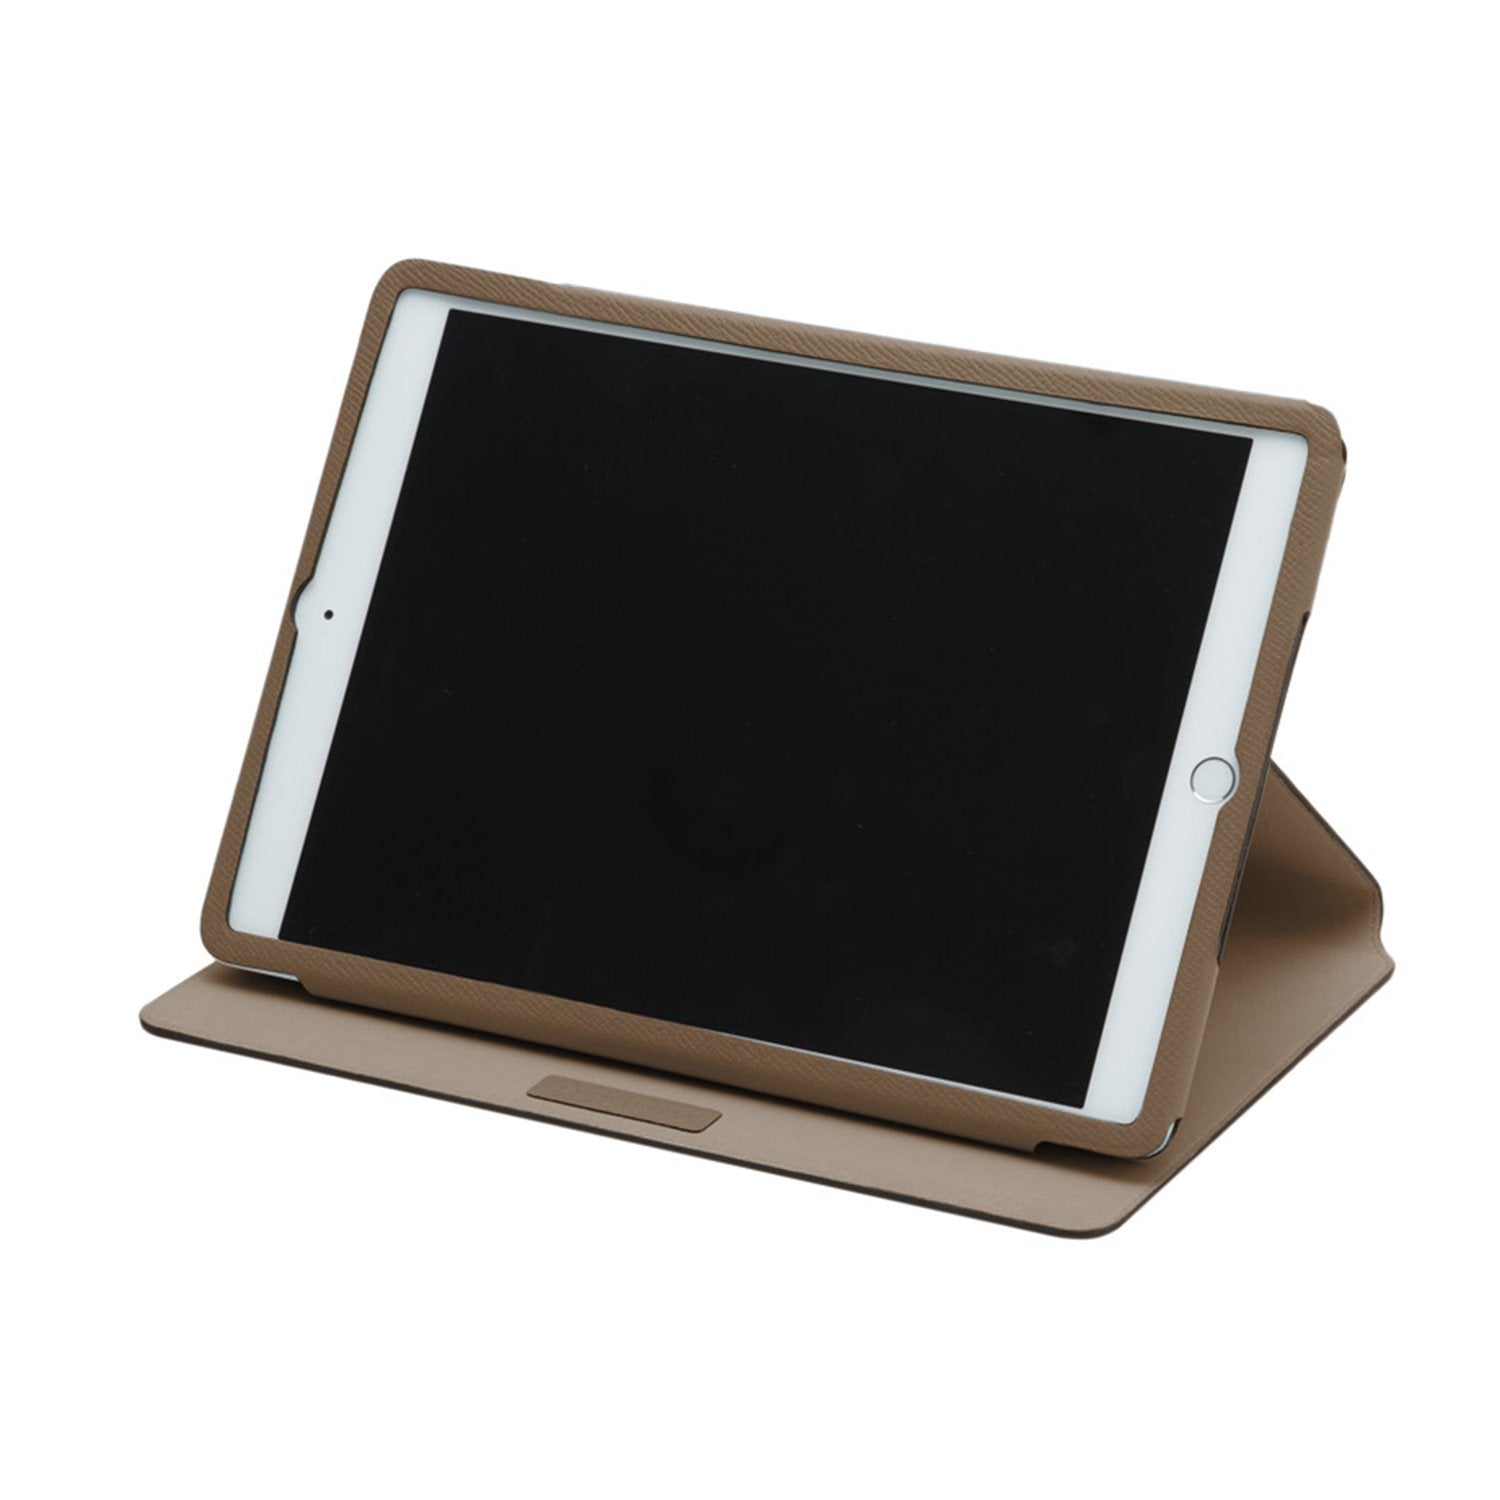 windykids Xperia Z4 tablet ケース SO-05G - Androidタブレット本体